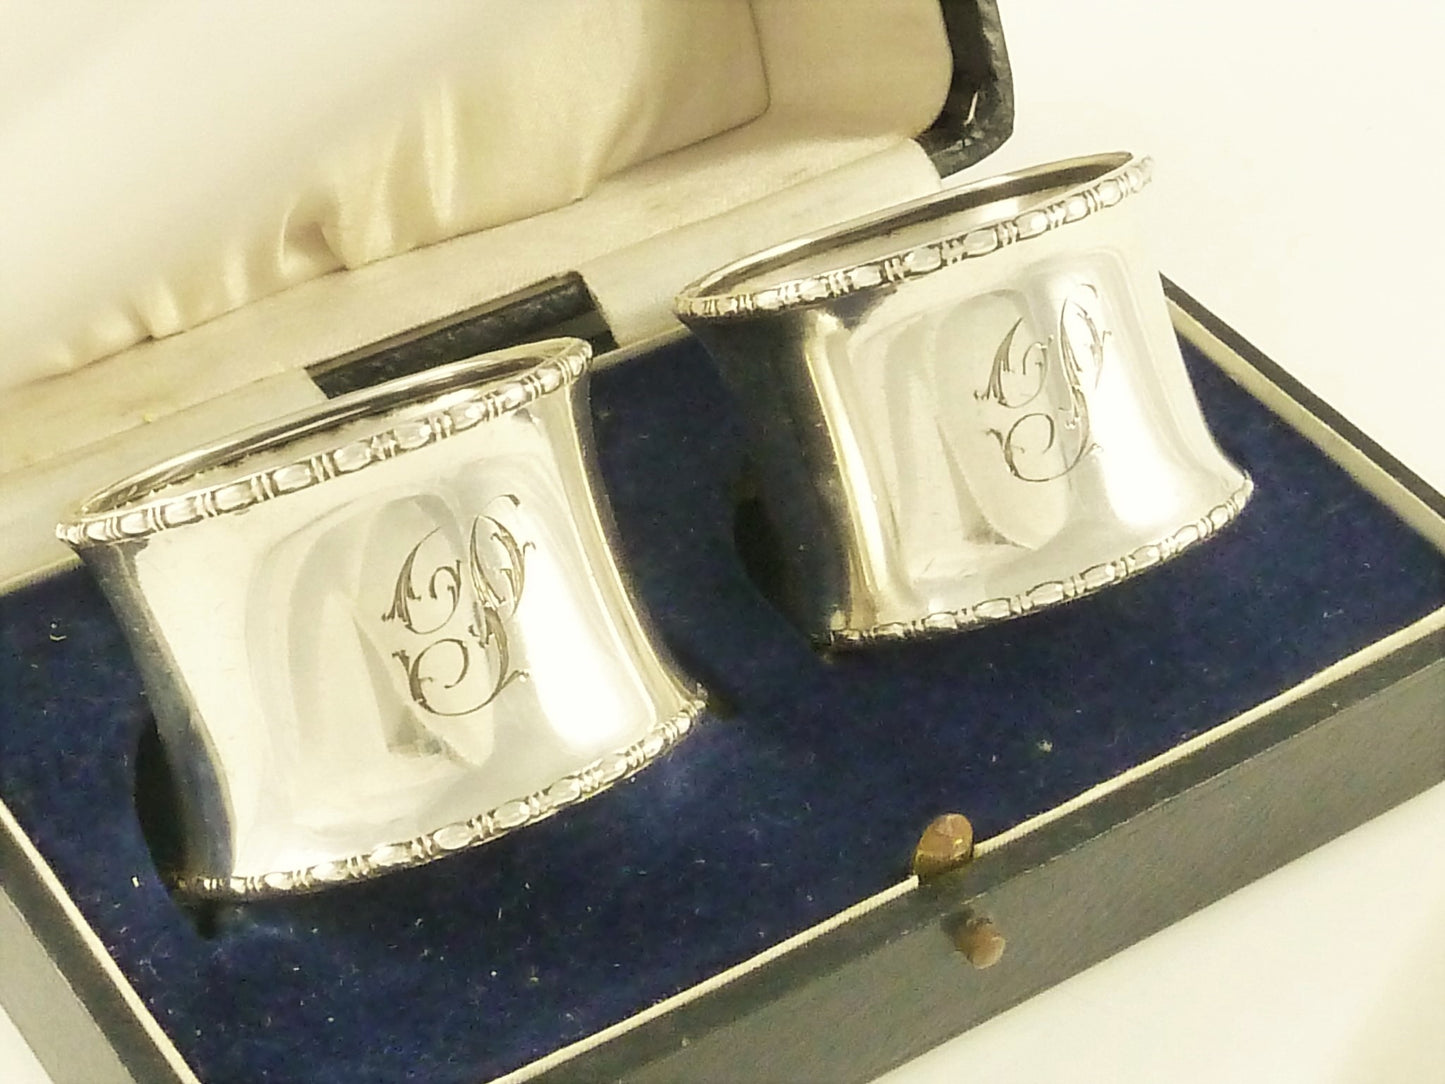 English Sterling Silver Napkin Rings, Monogram "P", A Pair with Presentation Box - 43 Chesapeake Court Antiques